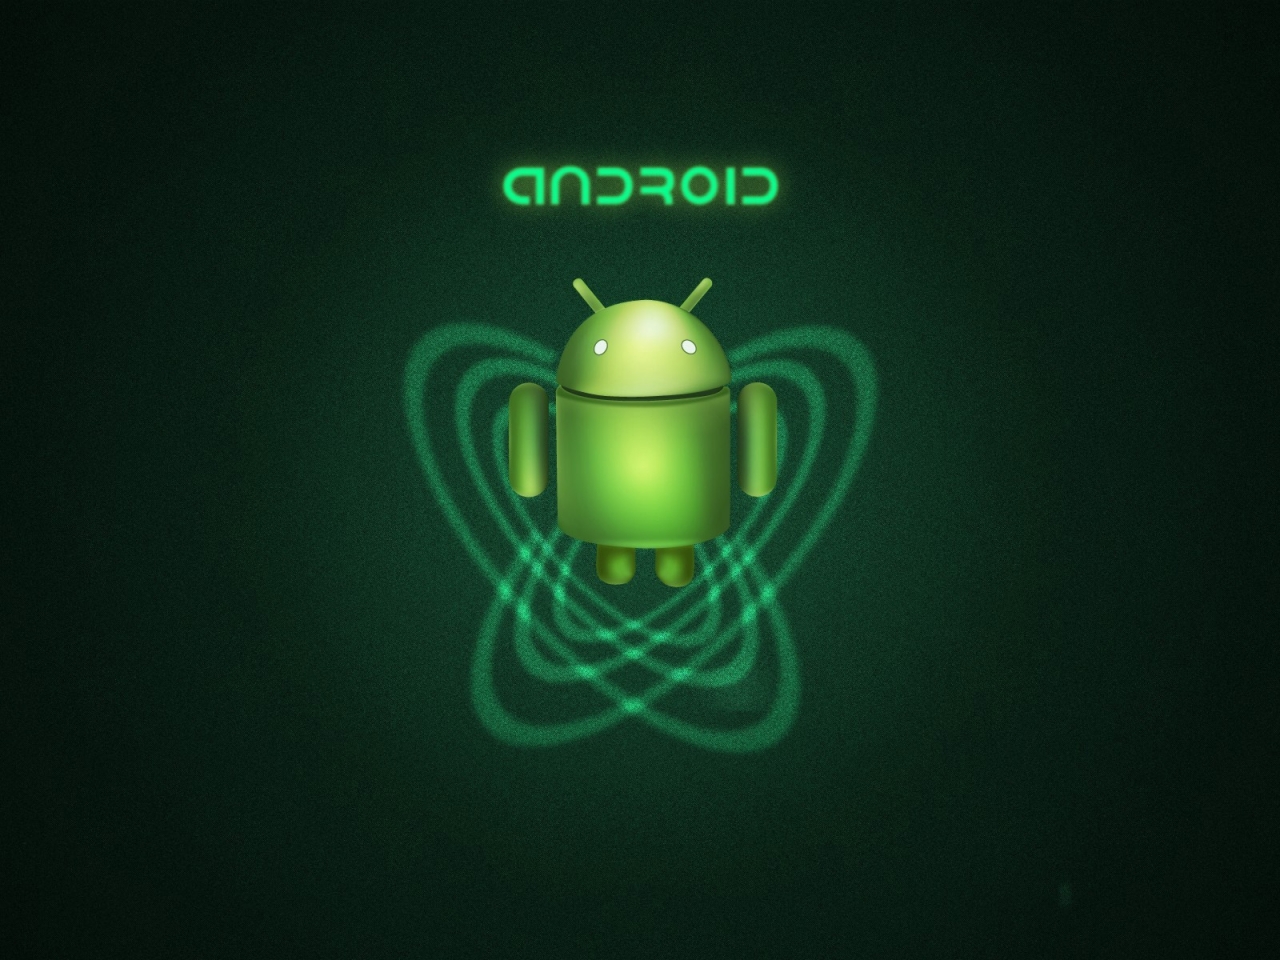 Android Mascot for 1280 x 960 resolution